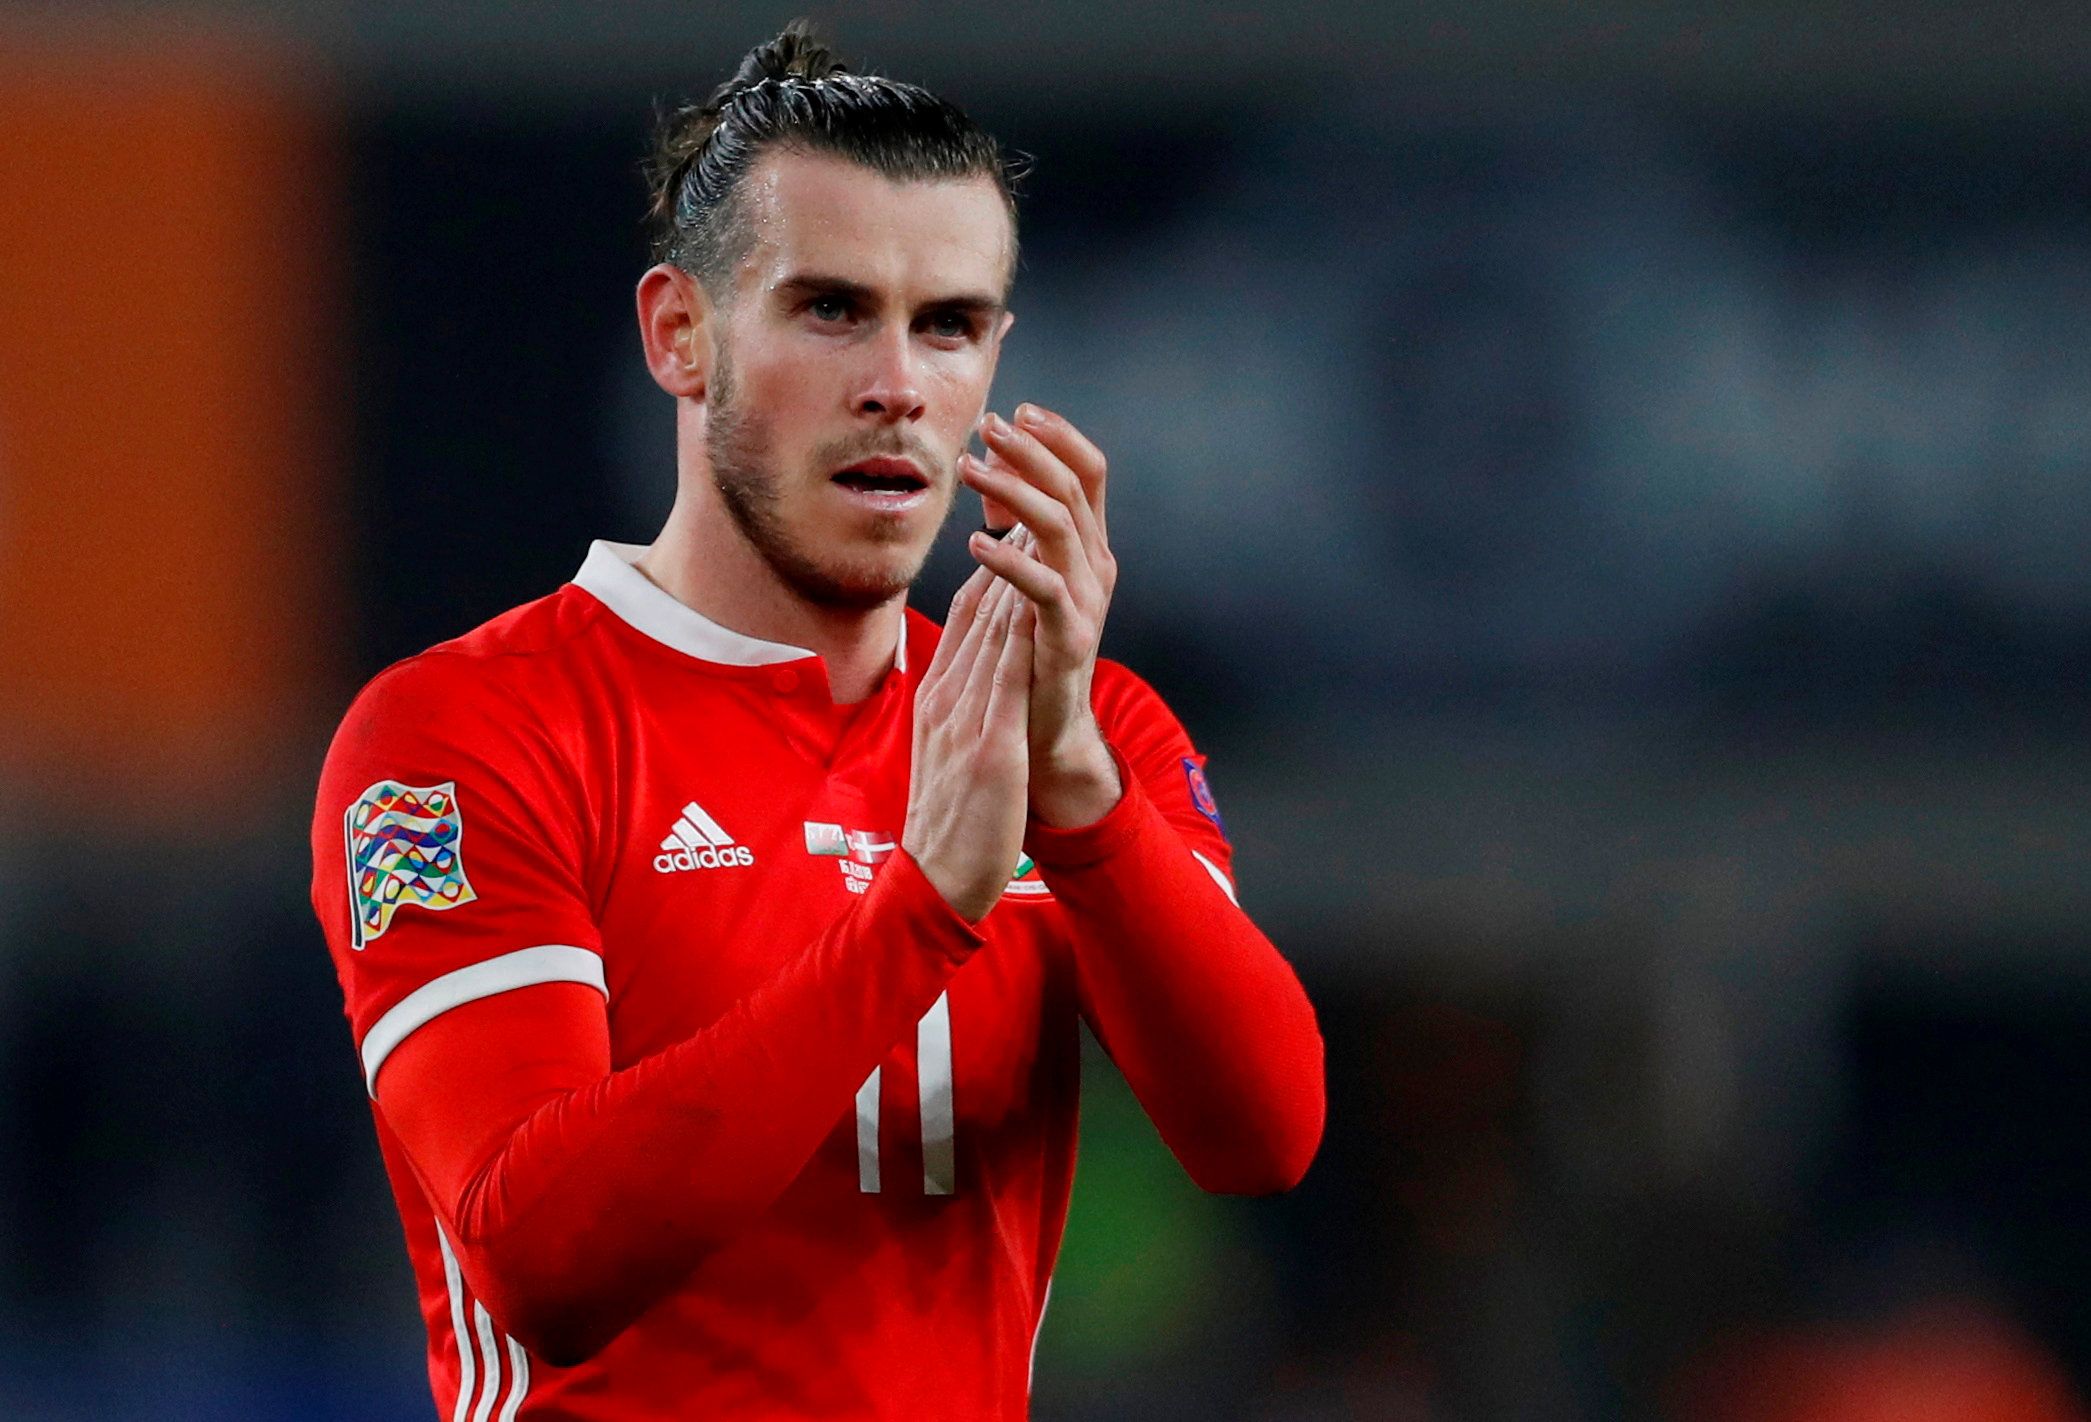 Soccer Football - UEFA Nations League - League B - Group 4 - Wales v Denmark - Cardiff City Stadium, Cardiff, Britain - November 16, 2018  Wales' Gareth Bale applauds fans after the match          Action Images via Reuters/Matthew Childs